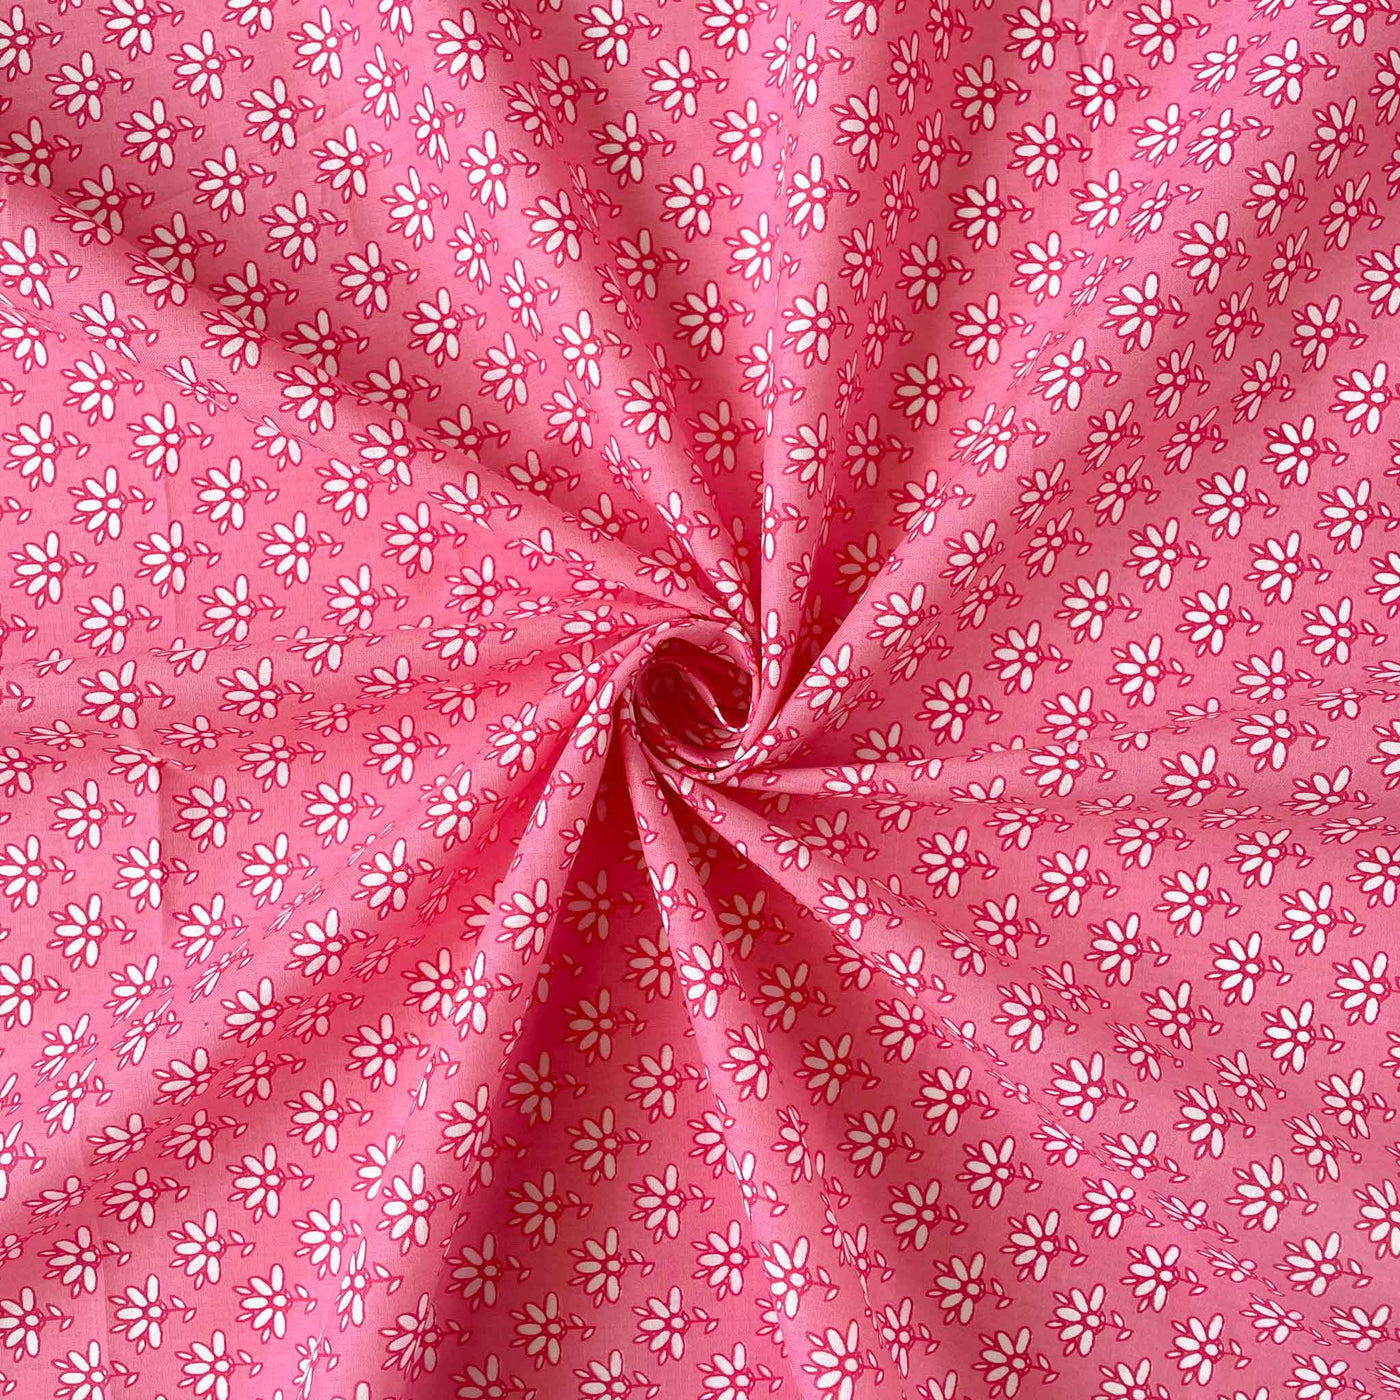 Fabric Pandit Fabric Light Pink and White Mini Flowers Hand Block Printed Pure Cotton Fabric (Width 43 inches)